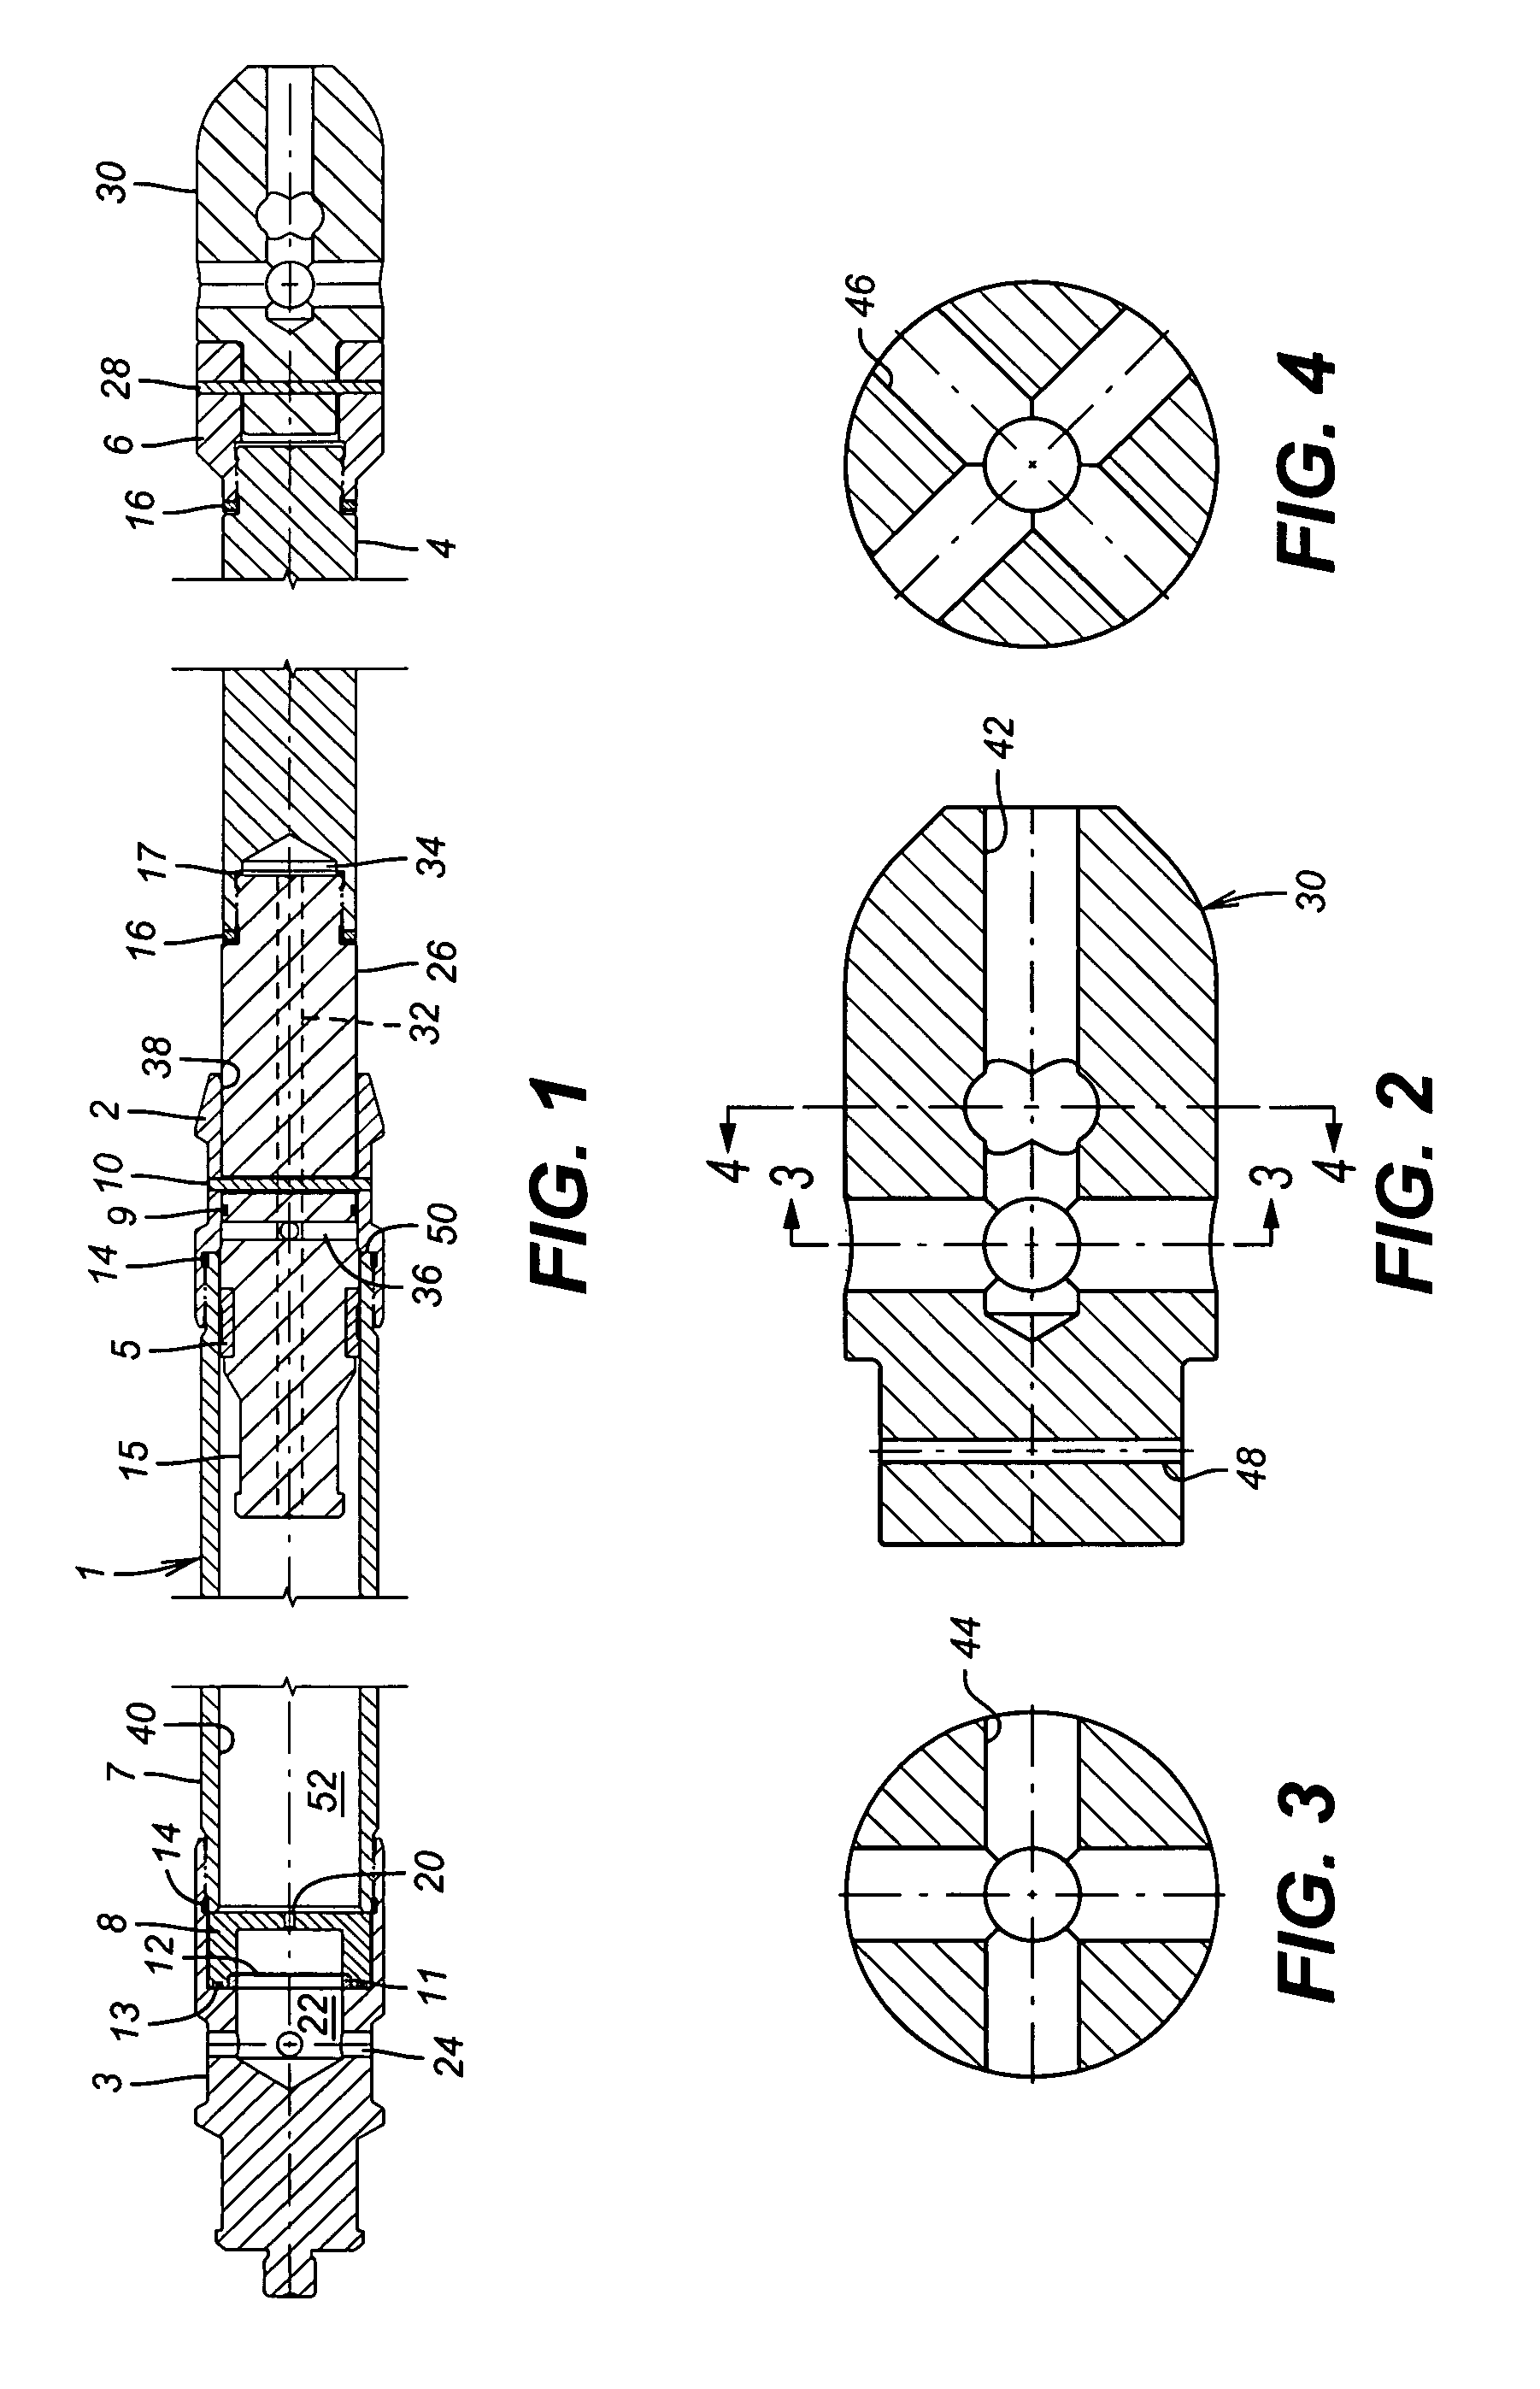 Downhole shock absorber with crushable nose